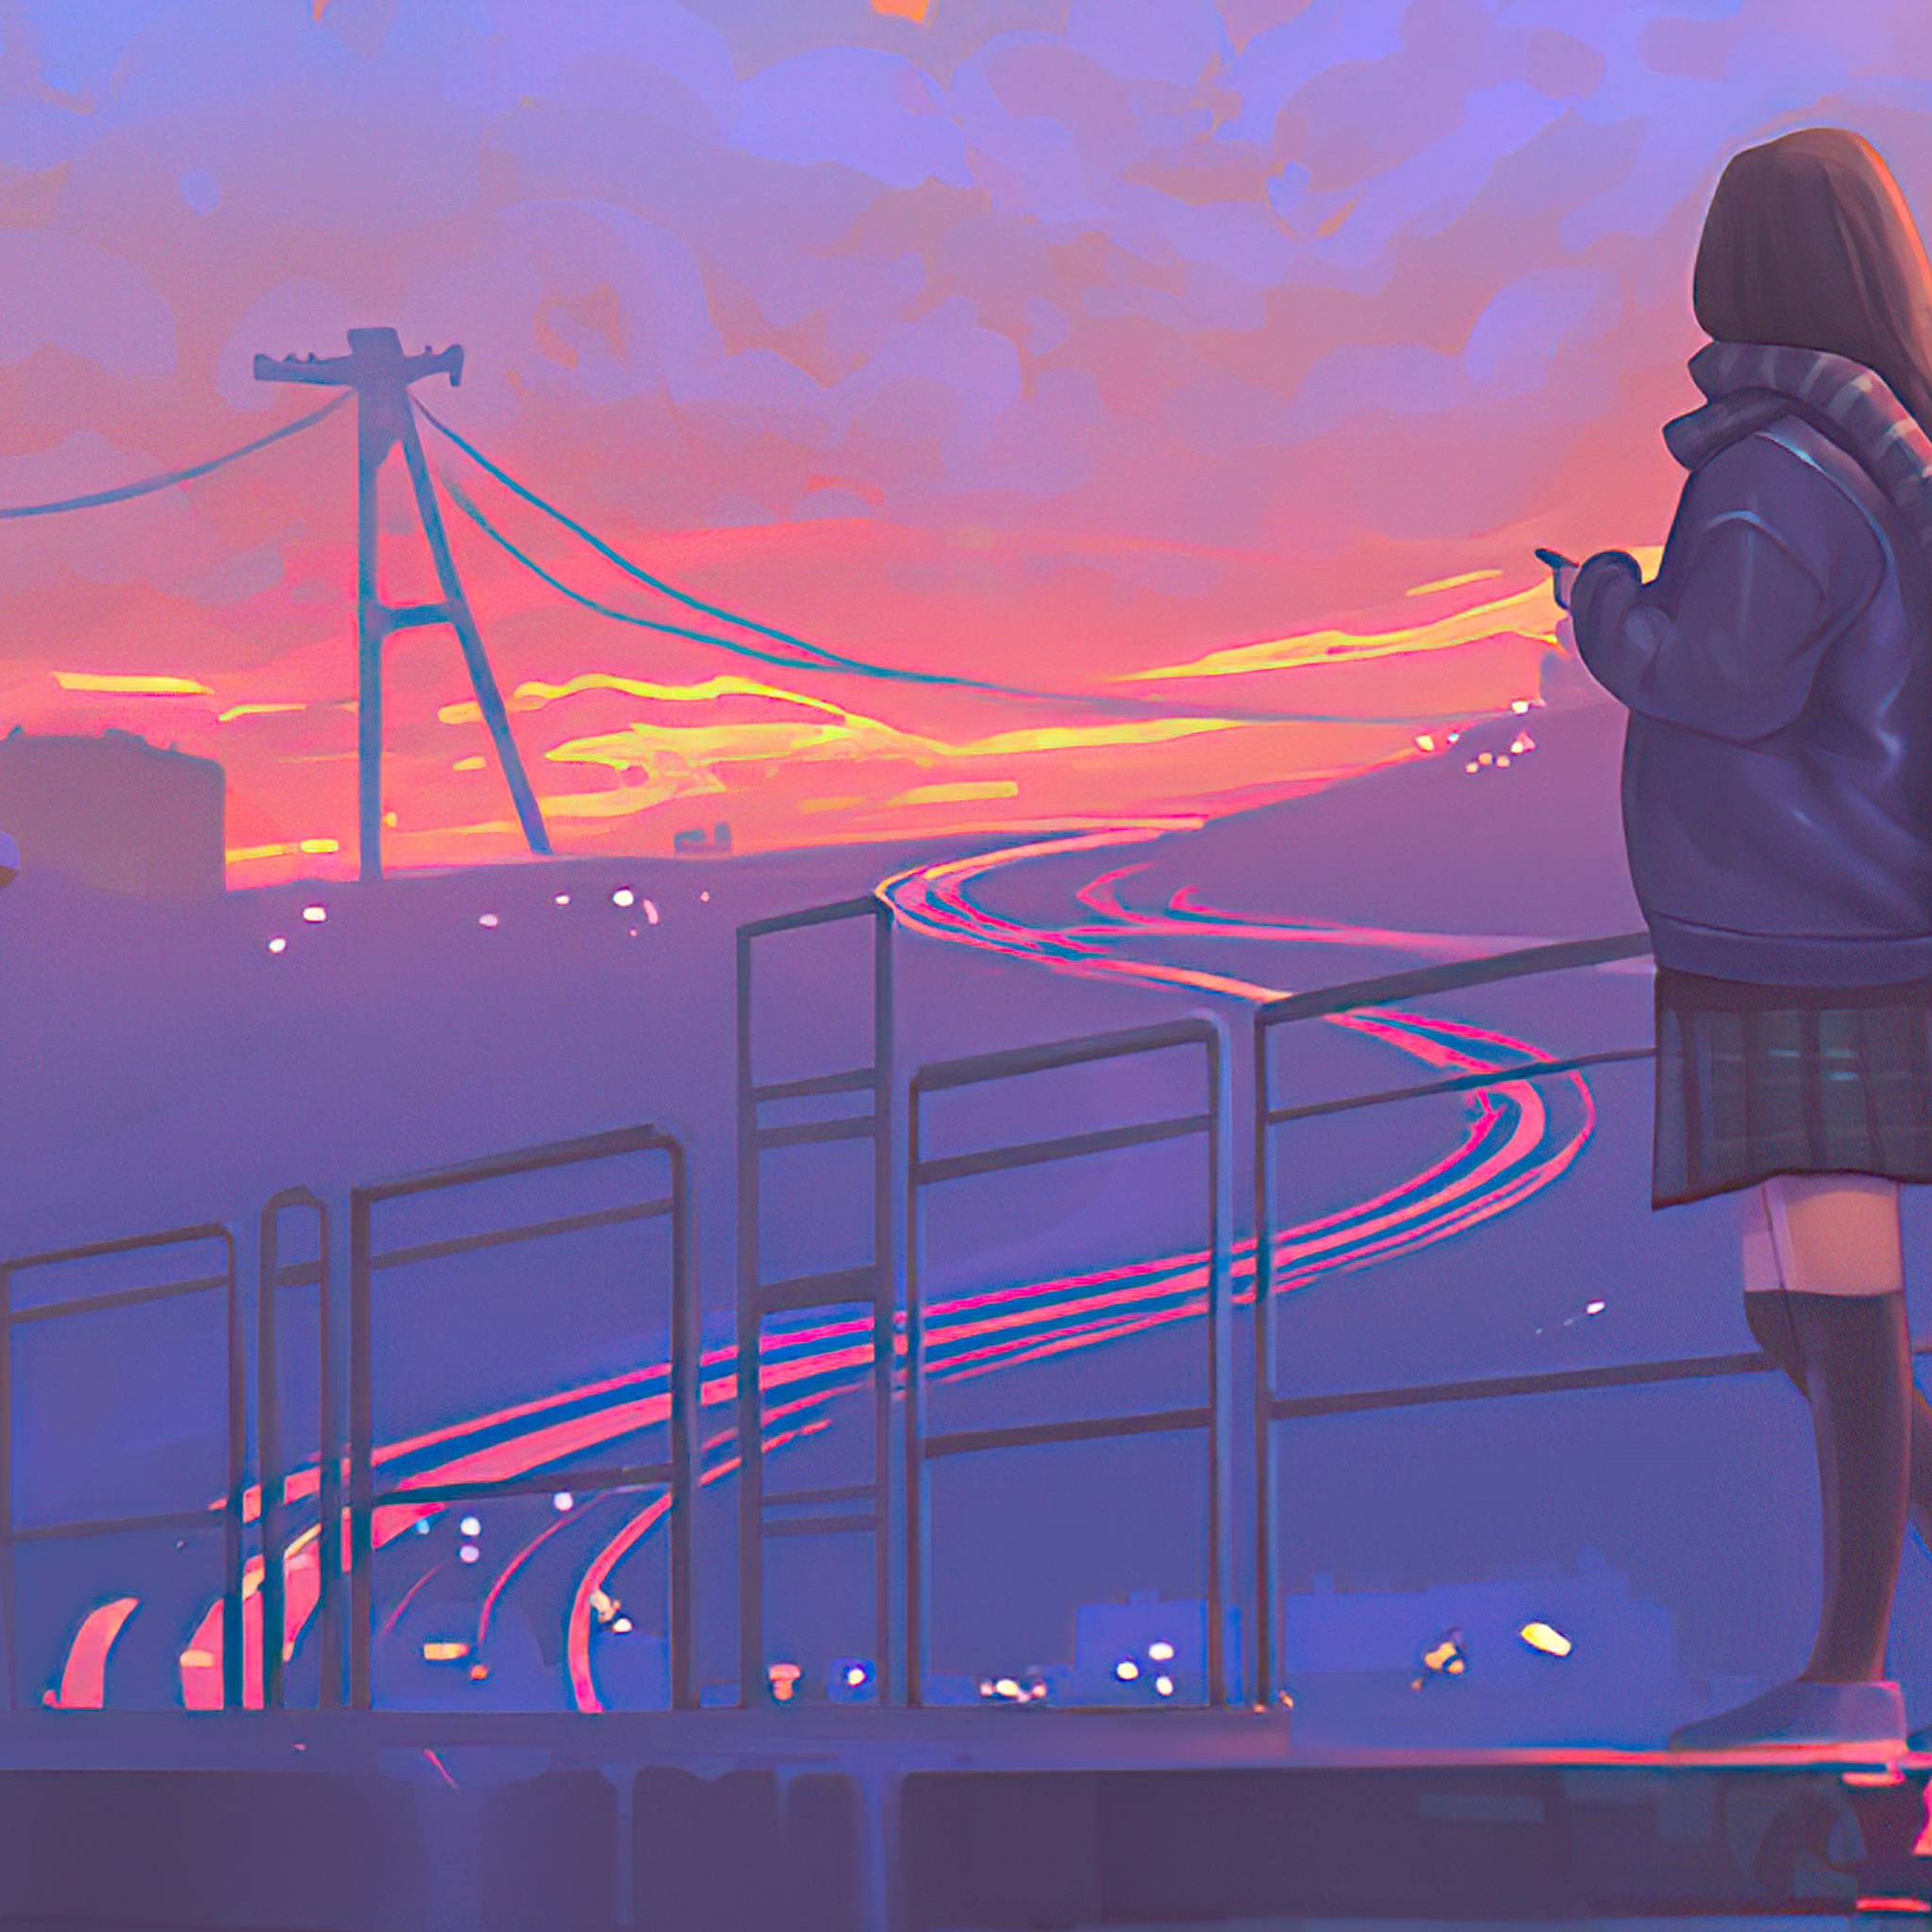 A girl in a skirt and jacket stands on a bridge at sunset, holding a smartphone. - Lo fi